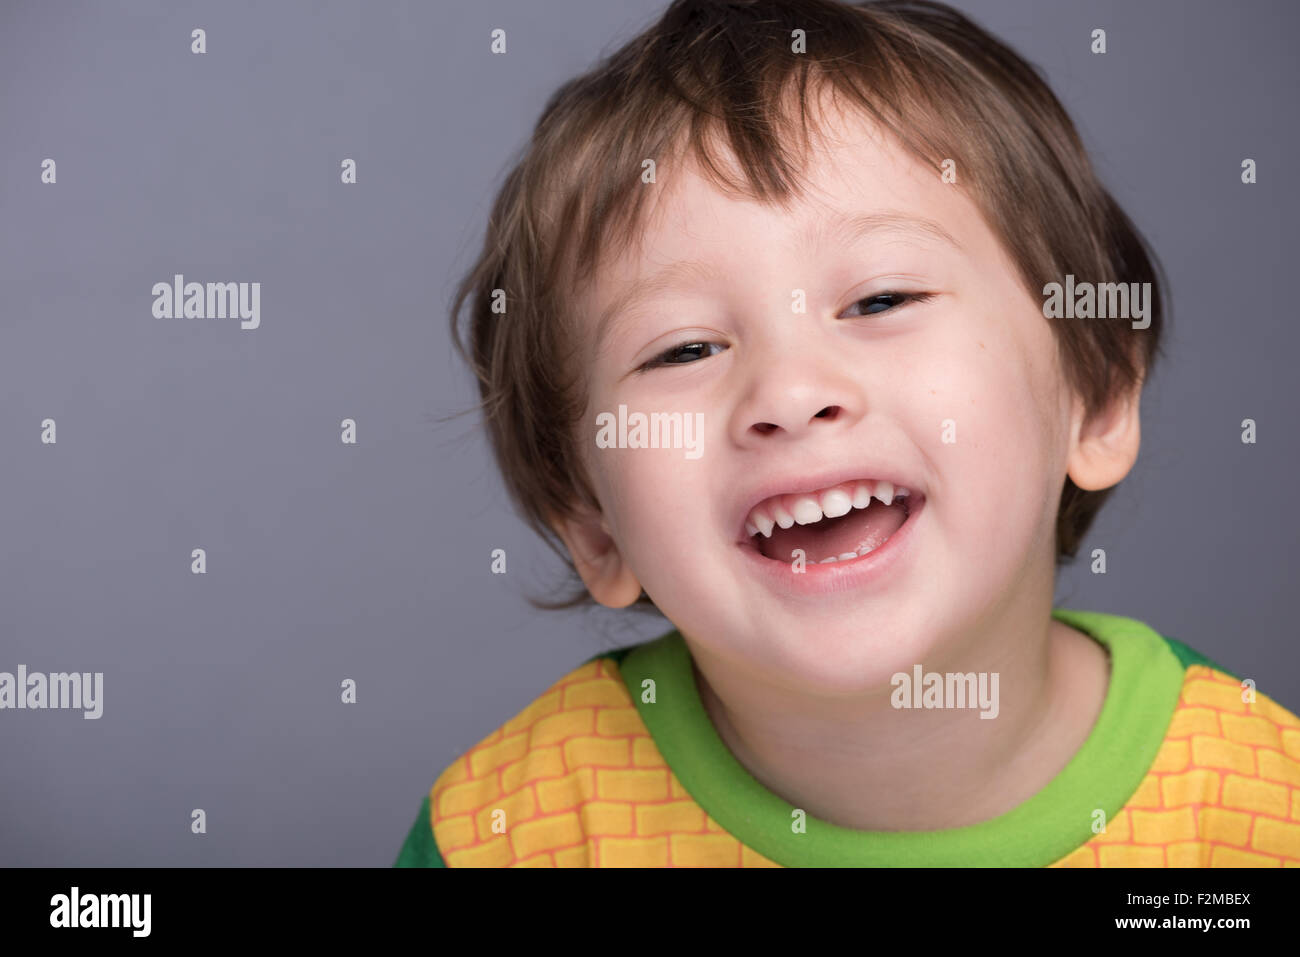 A happy 3 year old Japanese/Caucasian boy smiling. Stock Photo